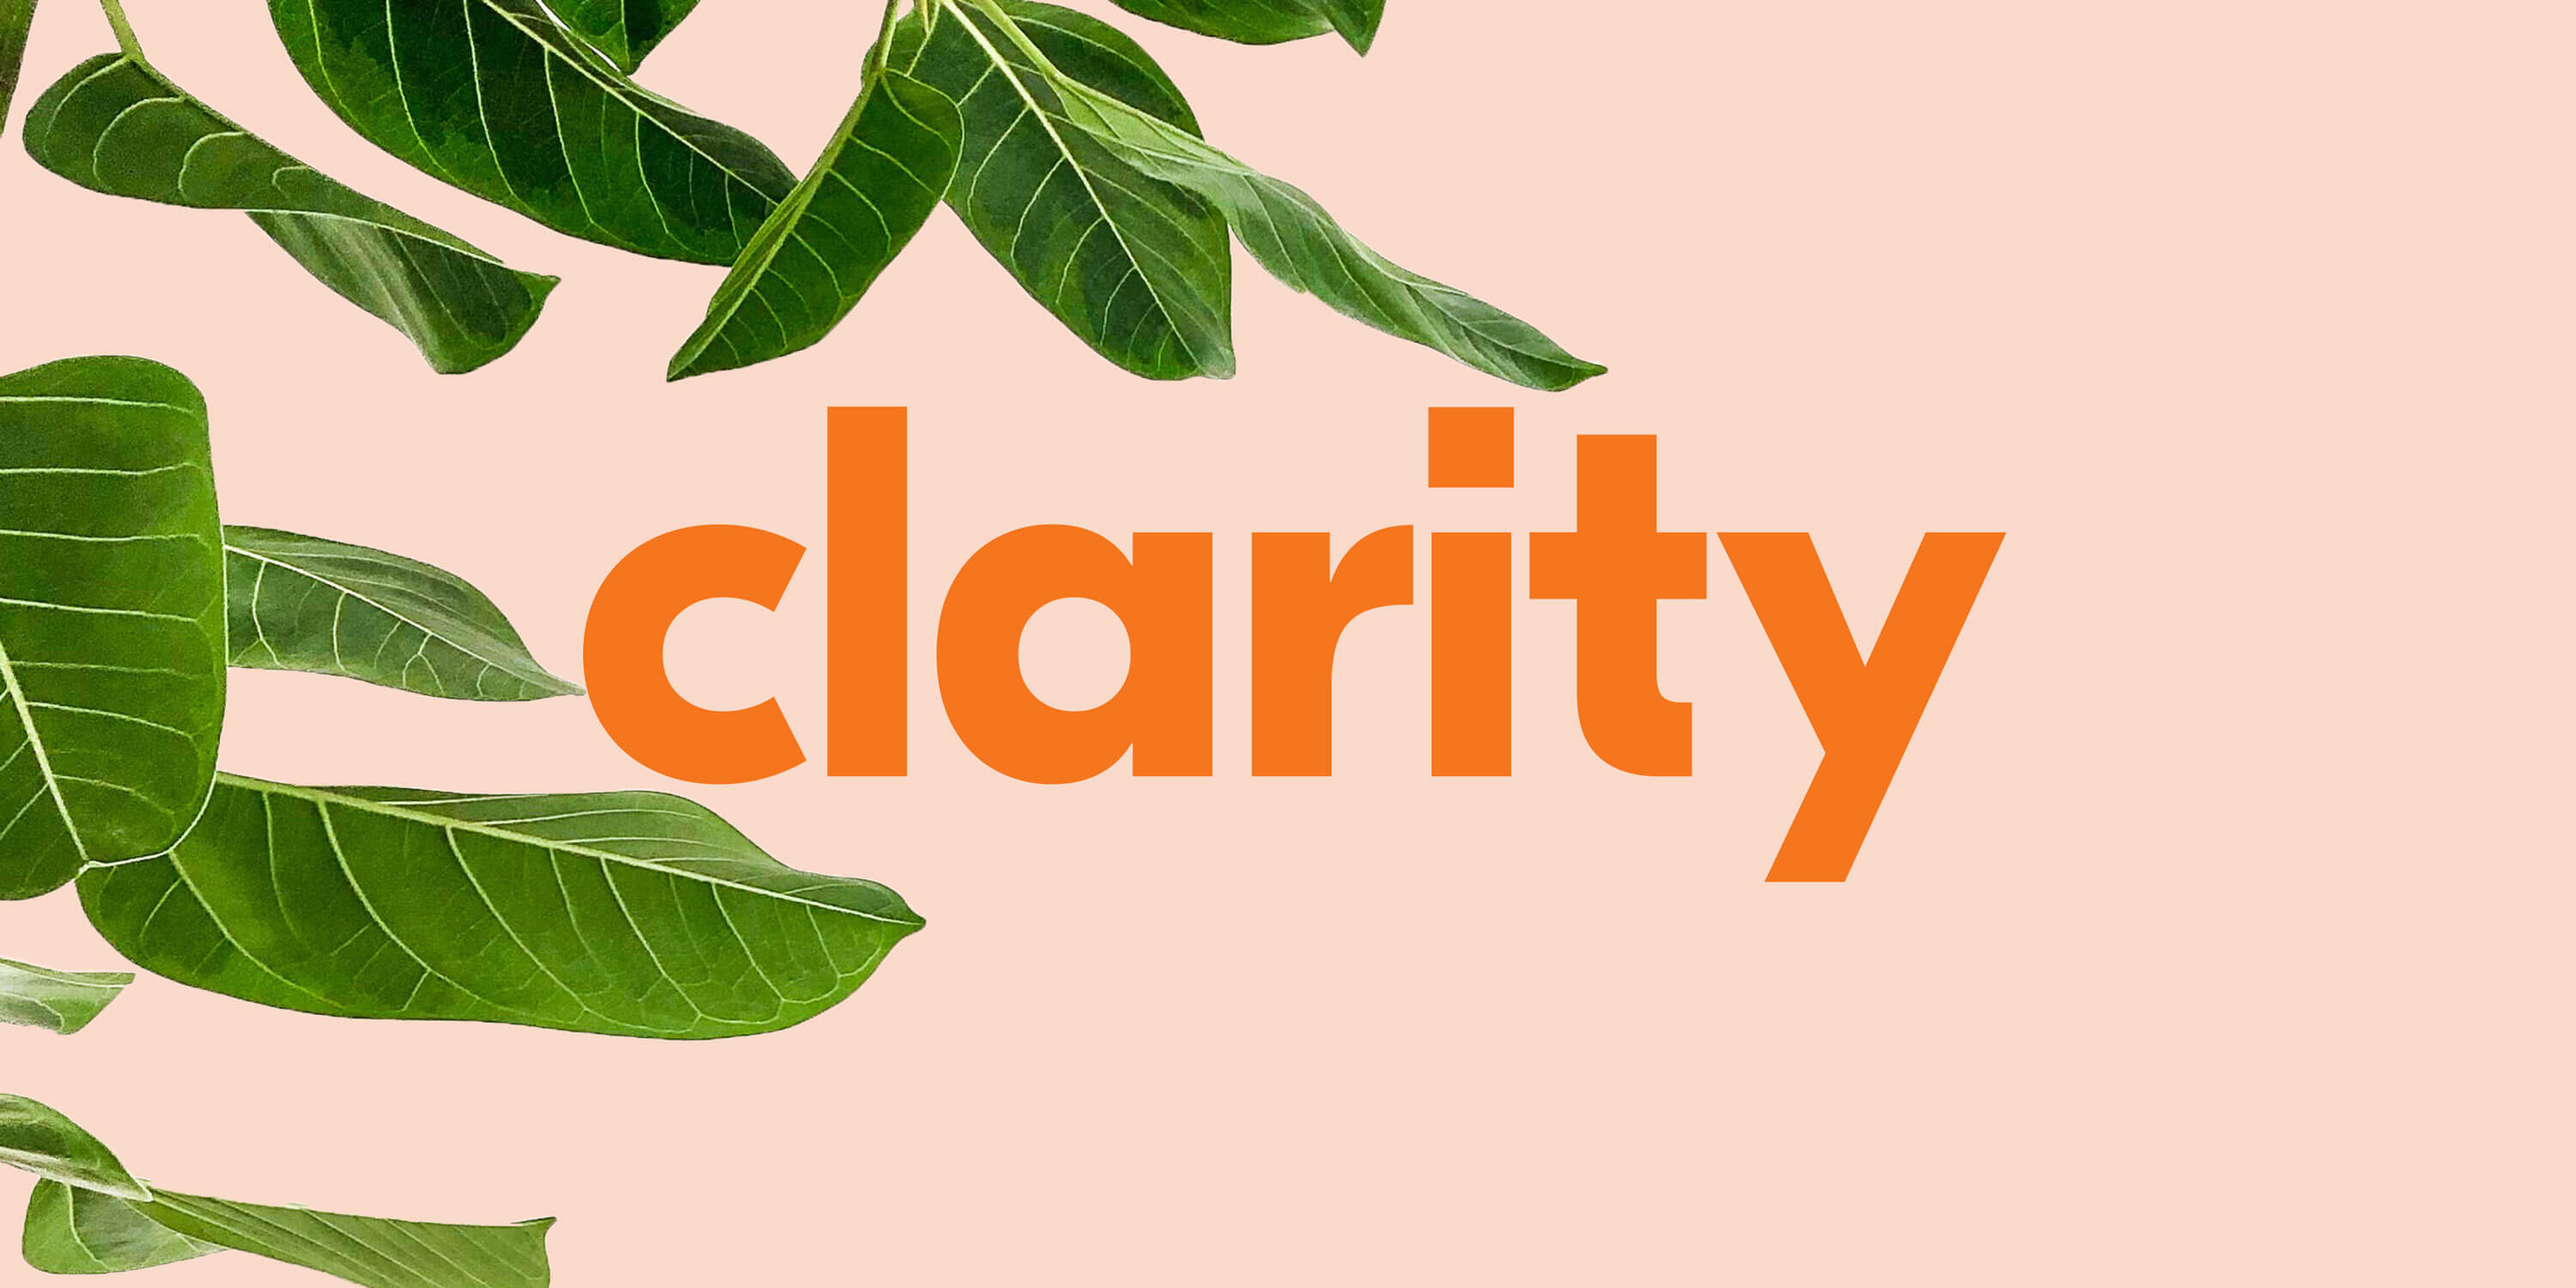 Clarity Staffing wordmark with some green leaves behind it